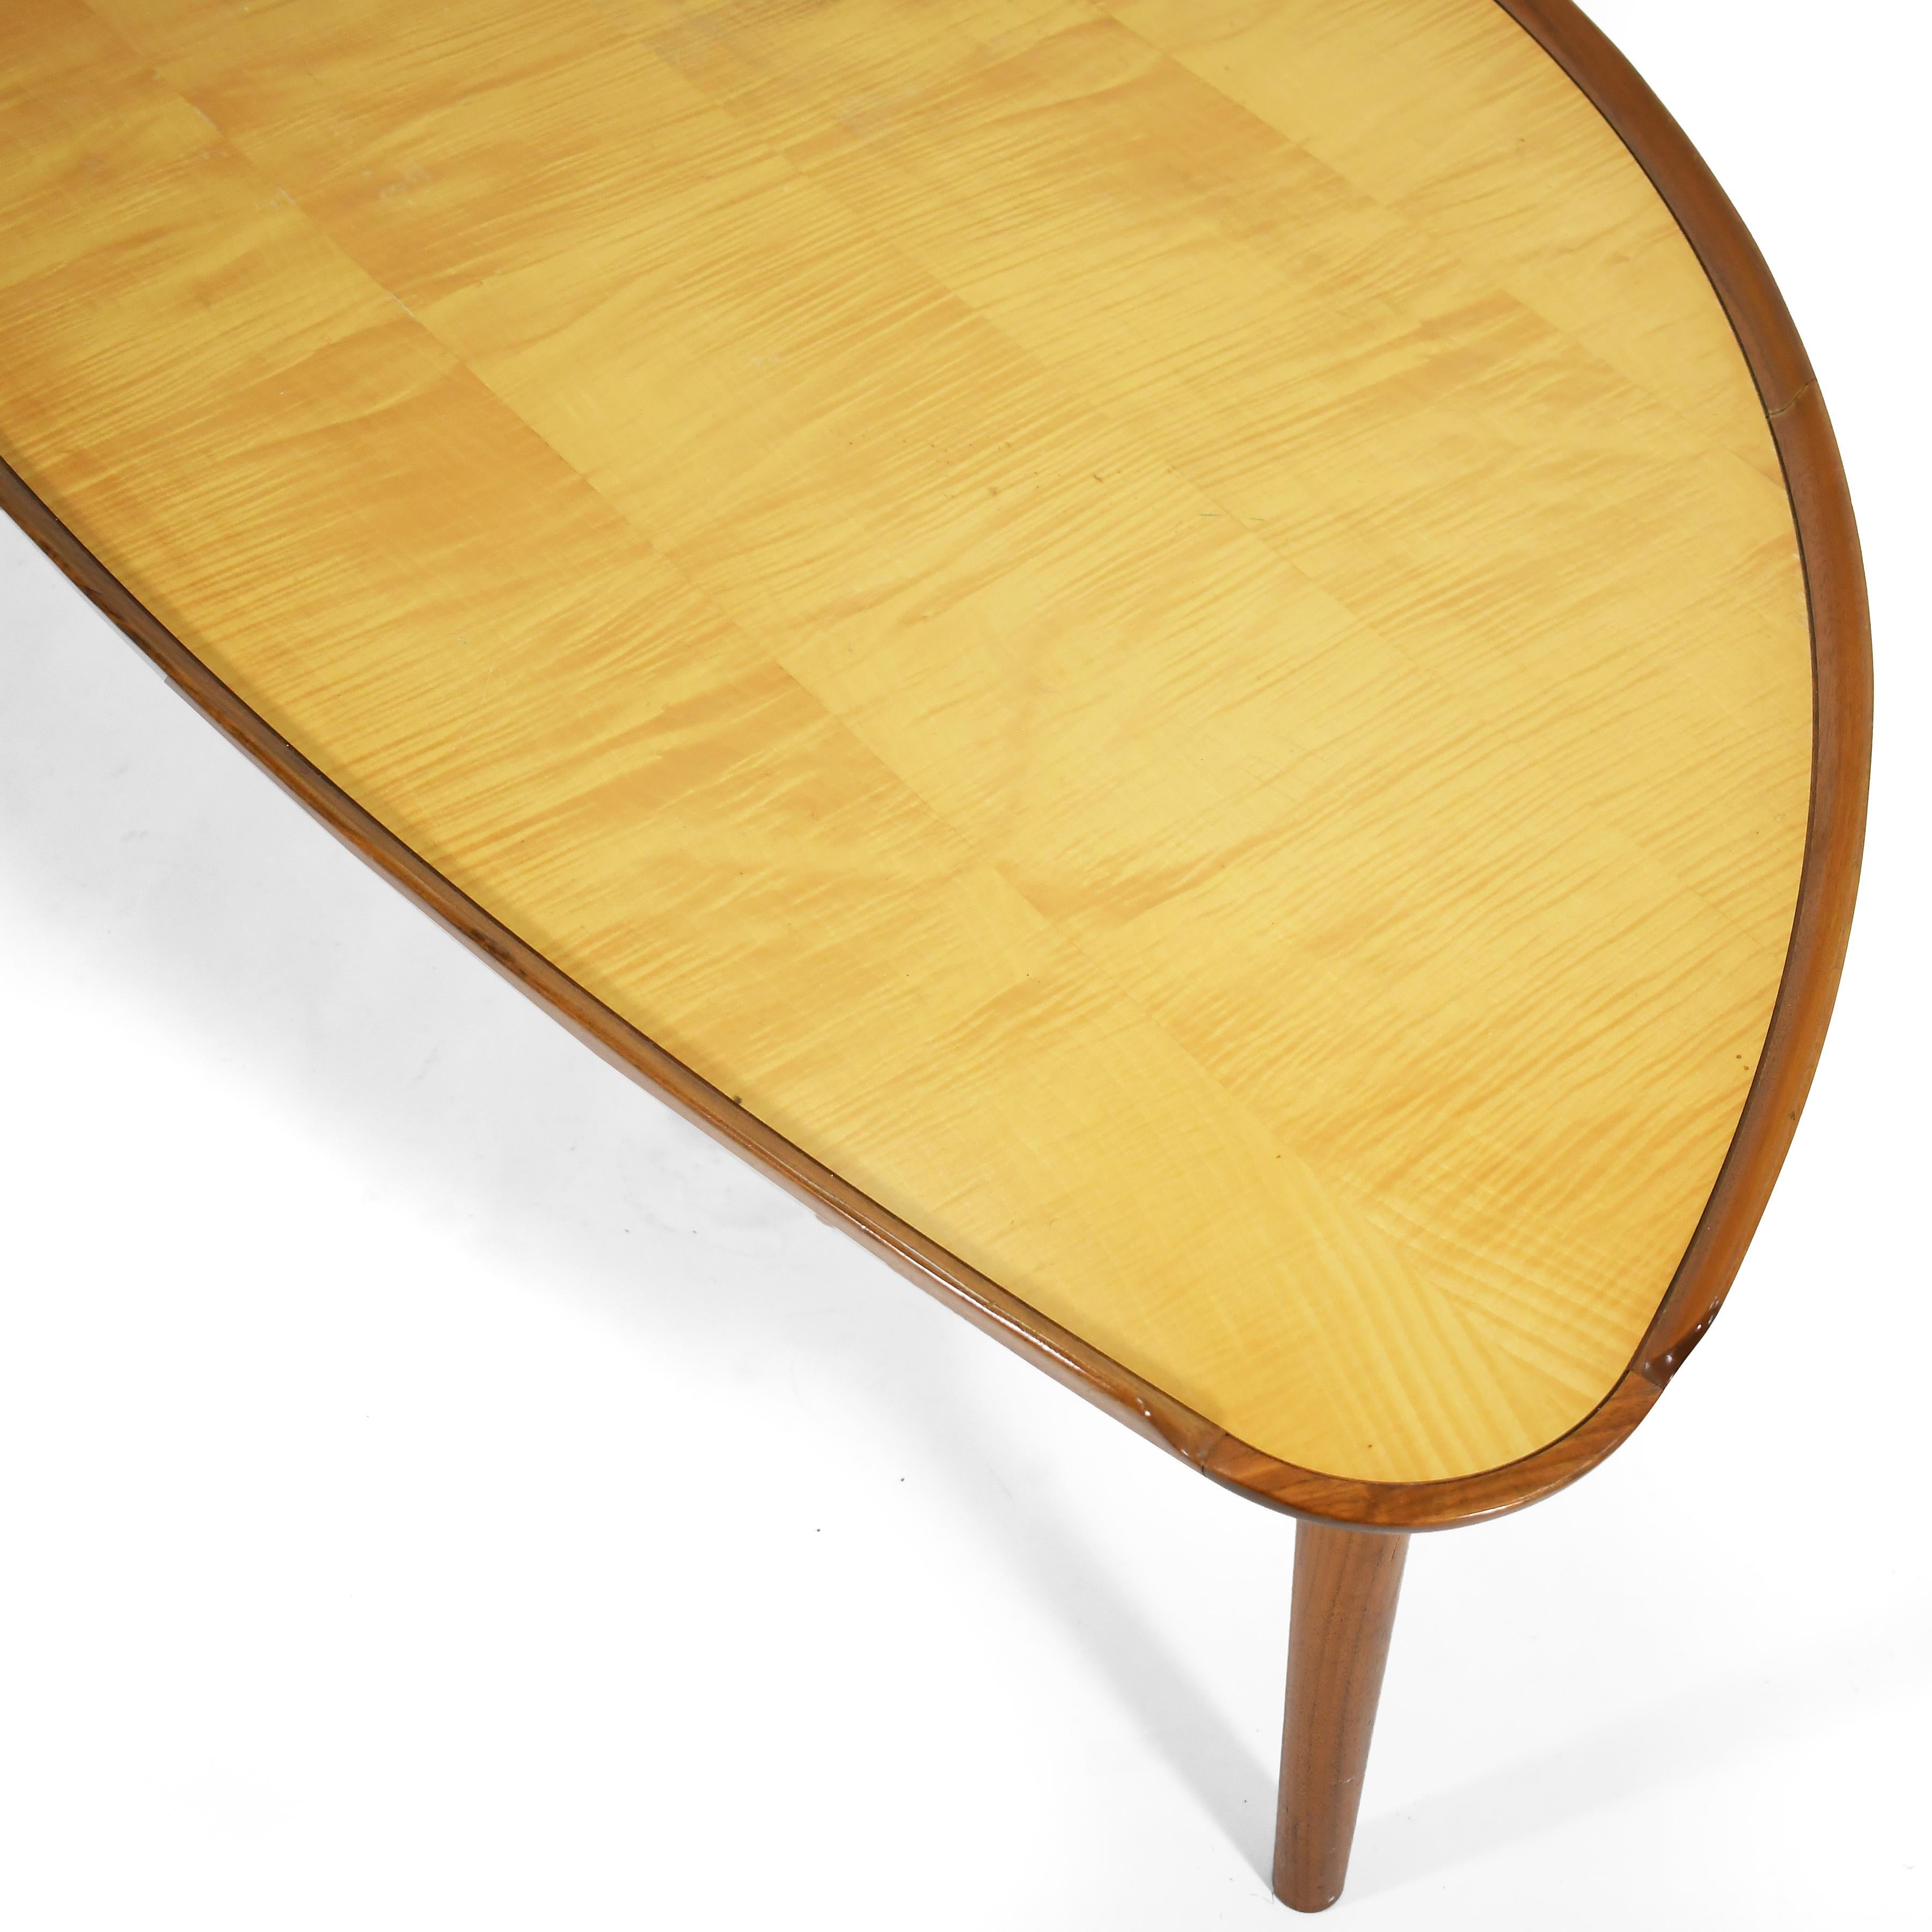 Sycamore Finn Juhl Coffee Table by Baker For Sale